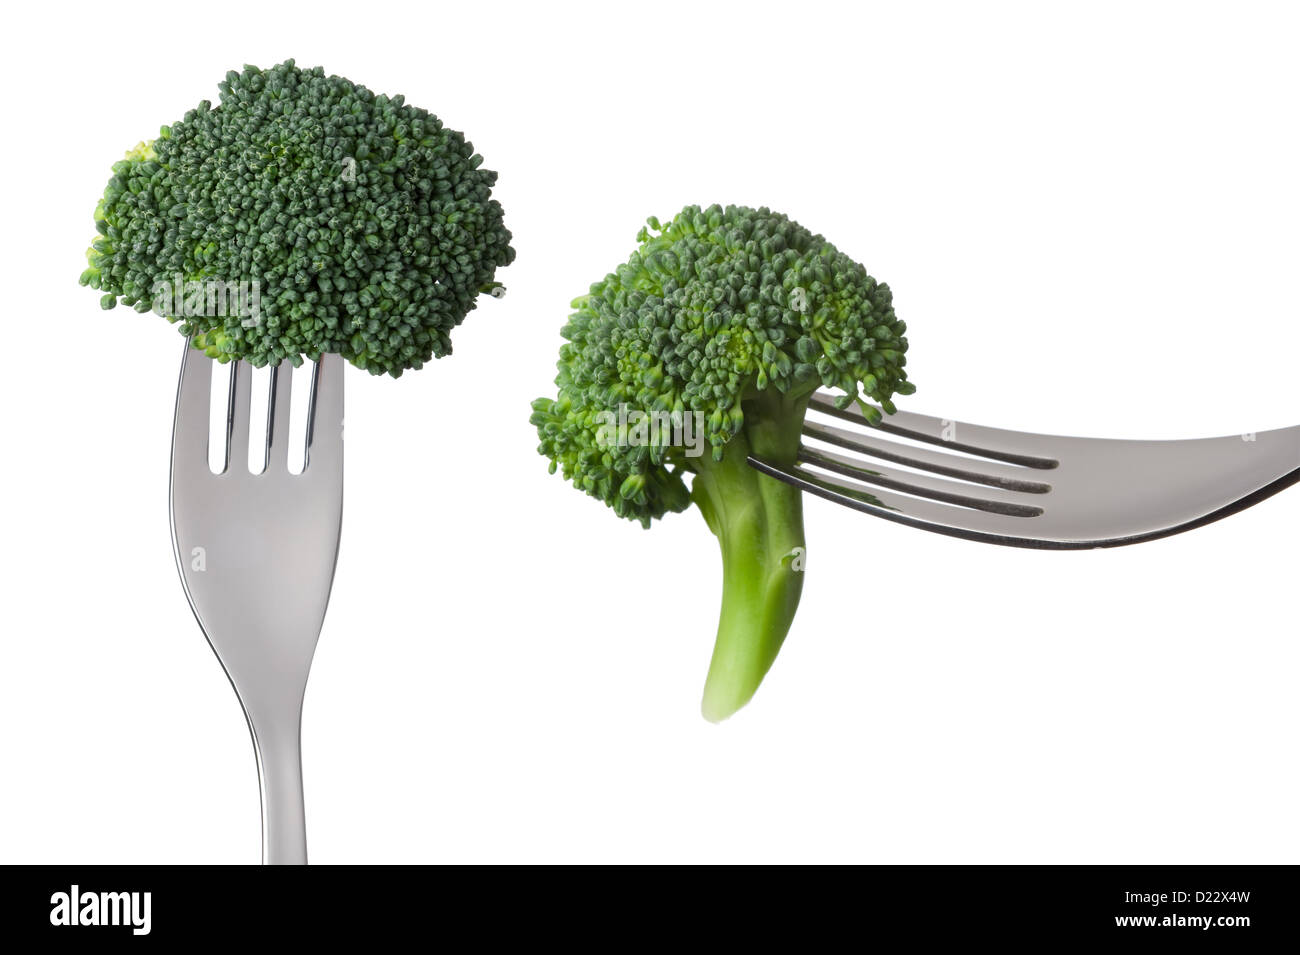 two broccoli florets on forks isolated against white background Stock Photo